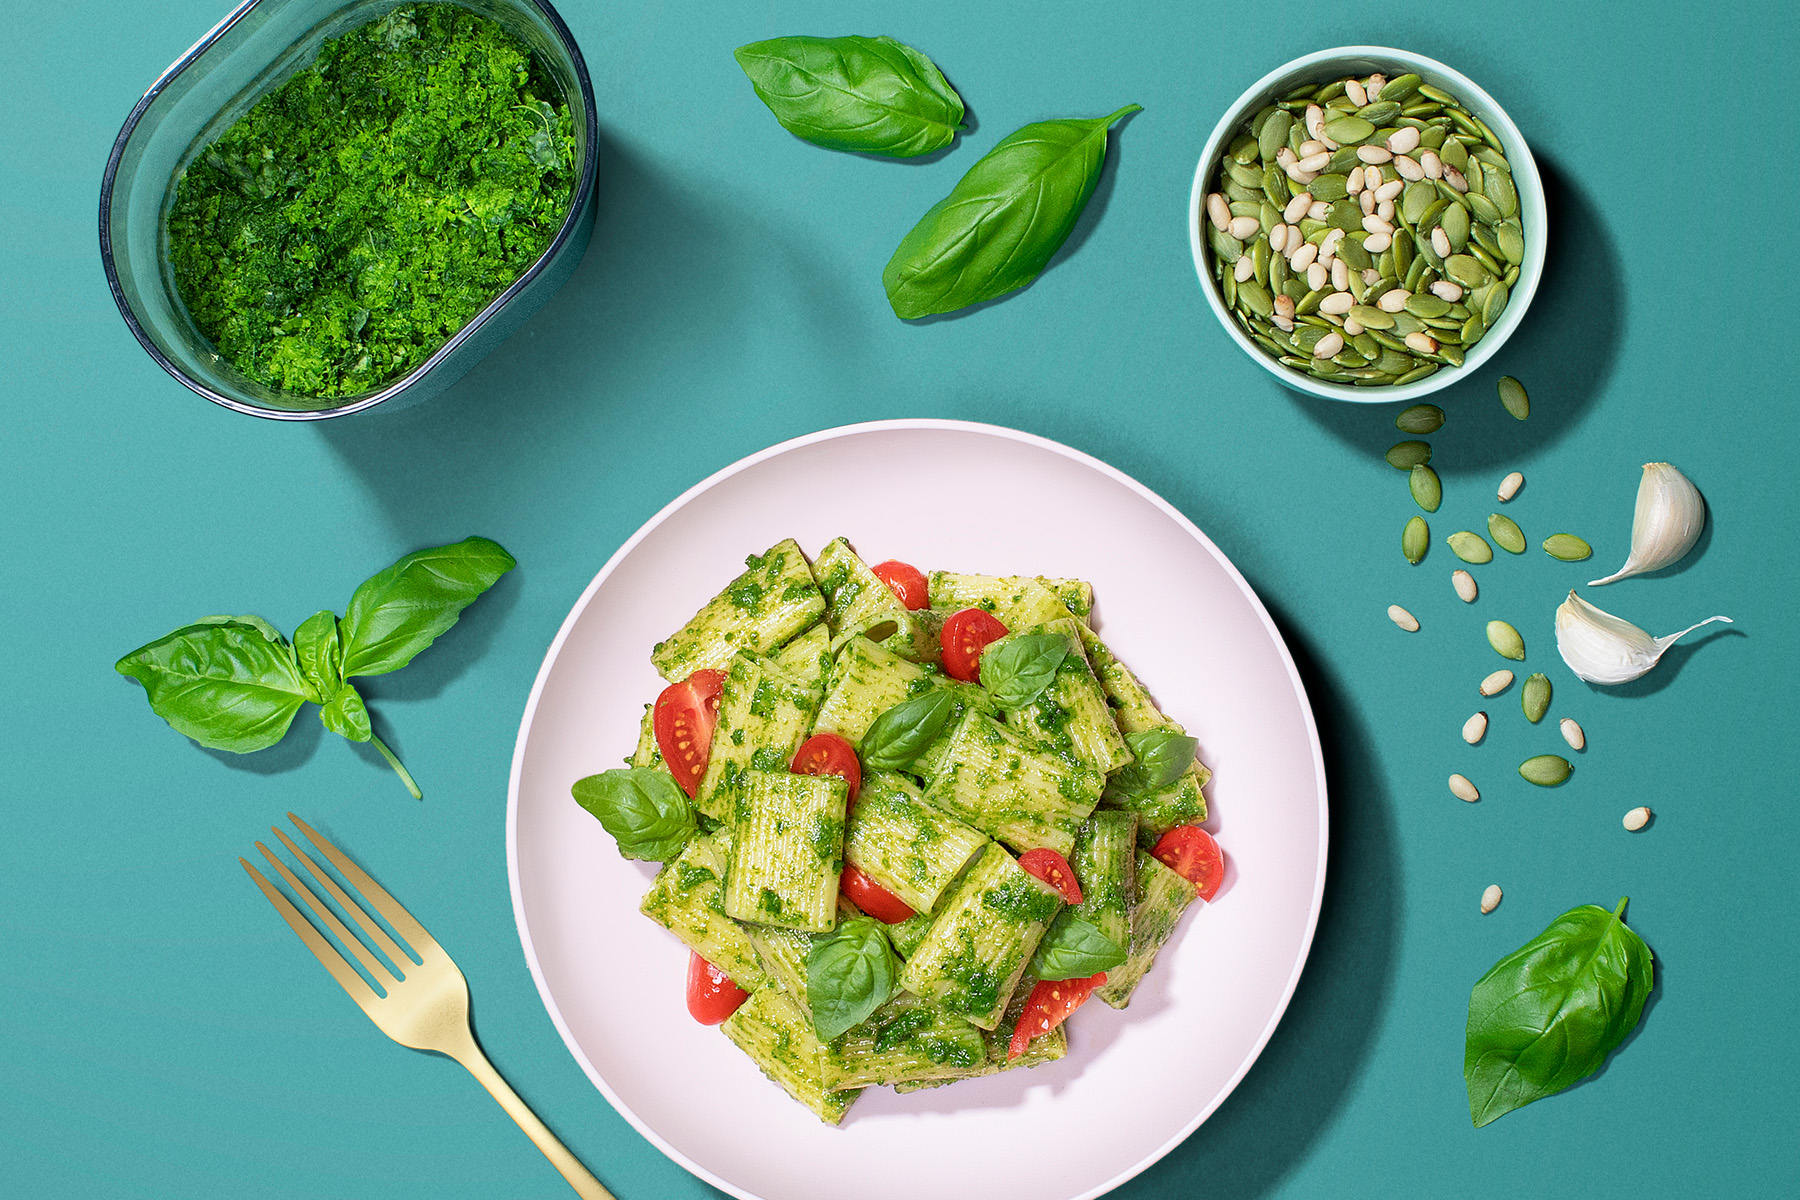 plate of pasta with pesto, basil, and cherry tomatoes with pesto ingredients